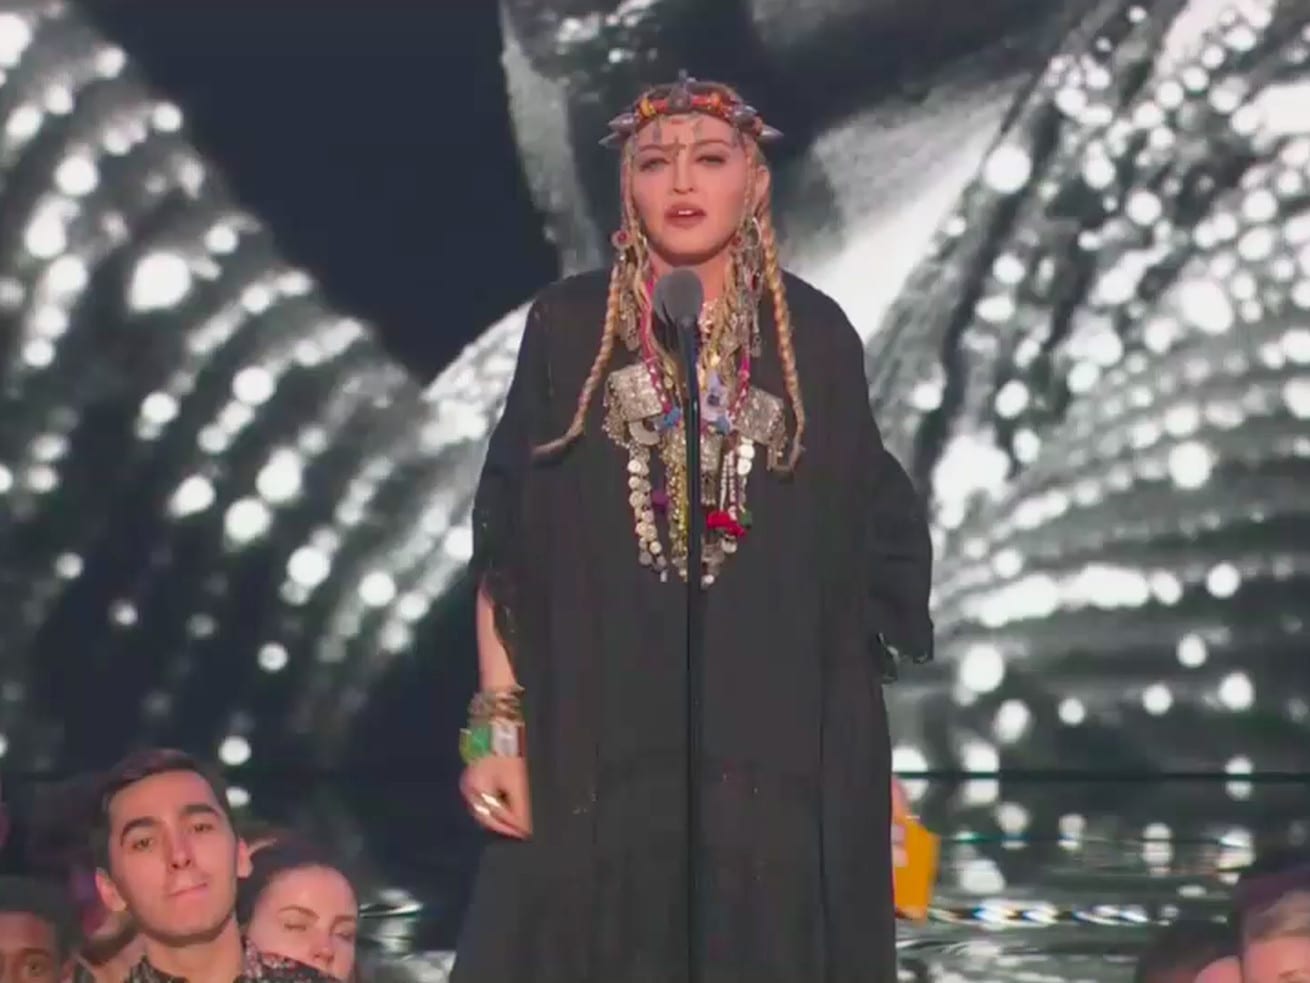 VMAs 2018: Madonna’s “tribute” to Aretha Franklin was all about Madonna